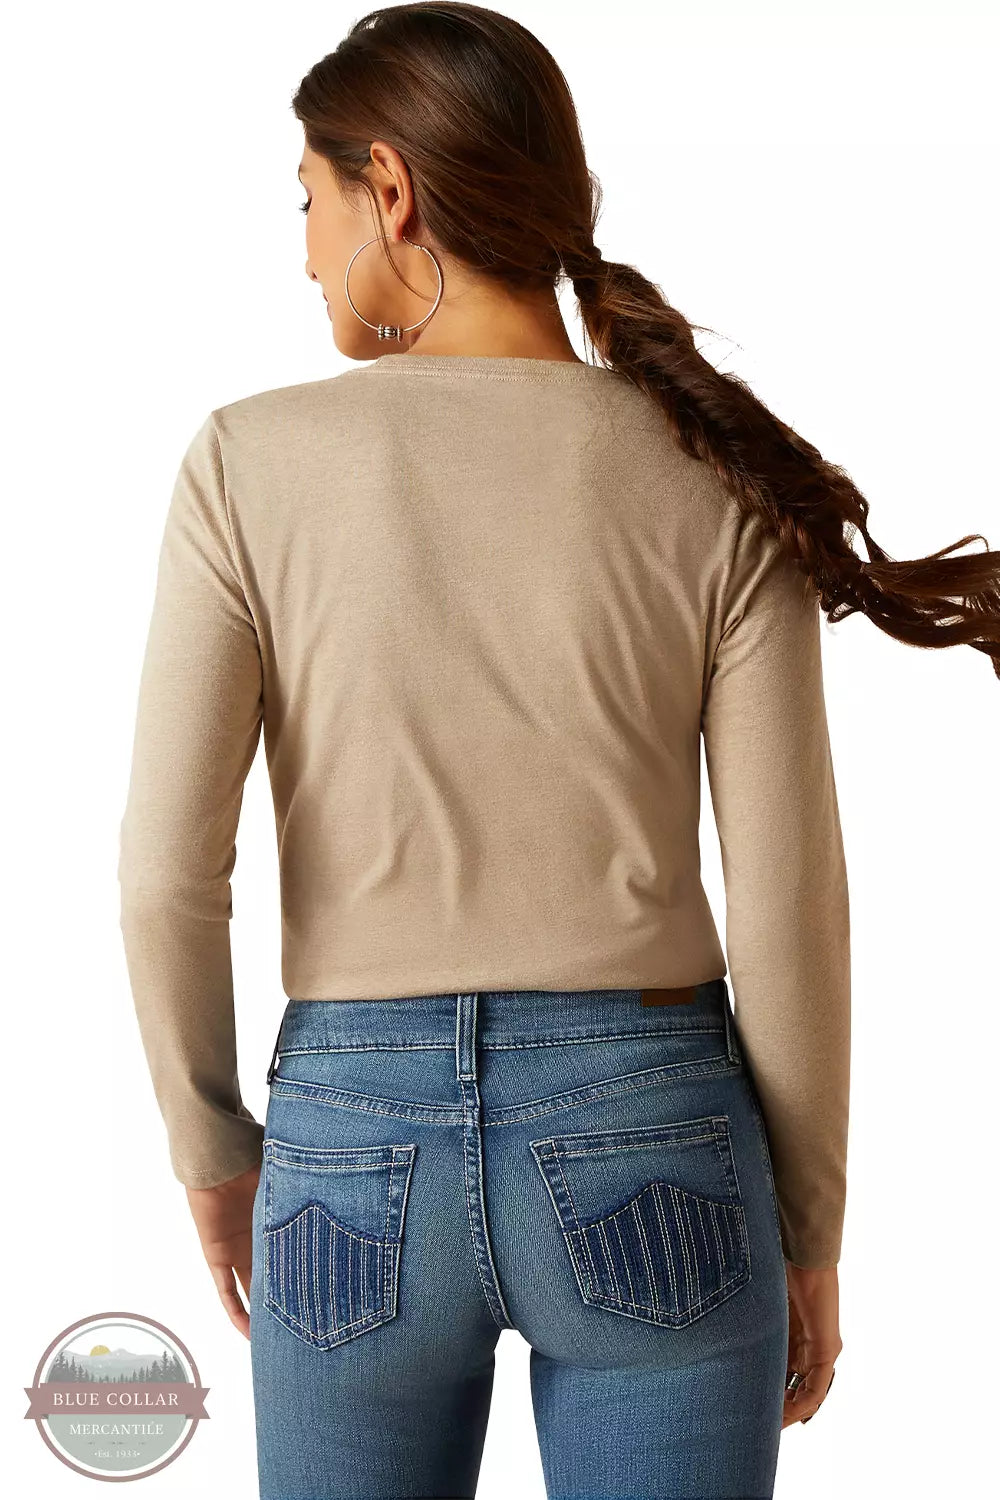 Ariat 10047916 Southwest Logo Long Sleeve T-Shirt in Oatmeal Heather Back View